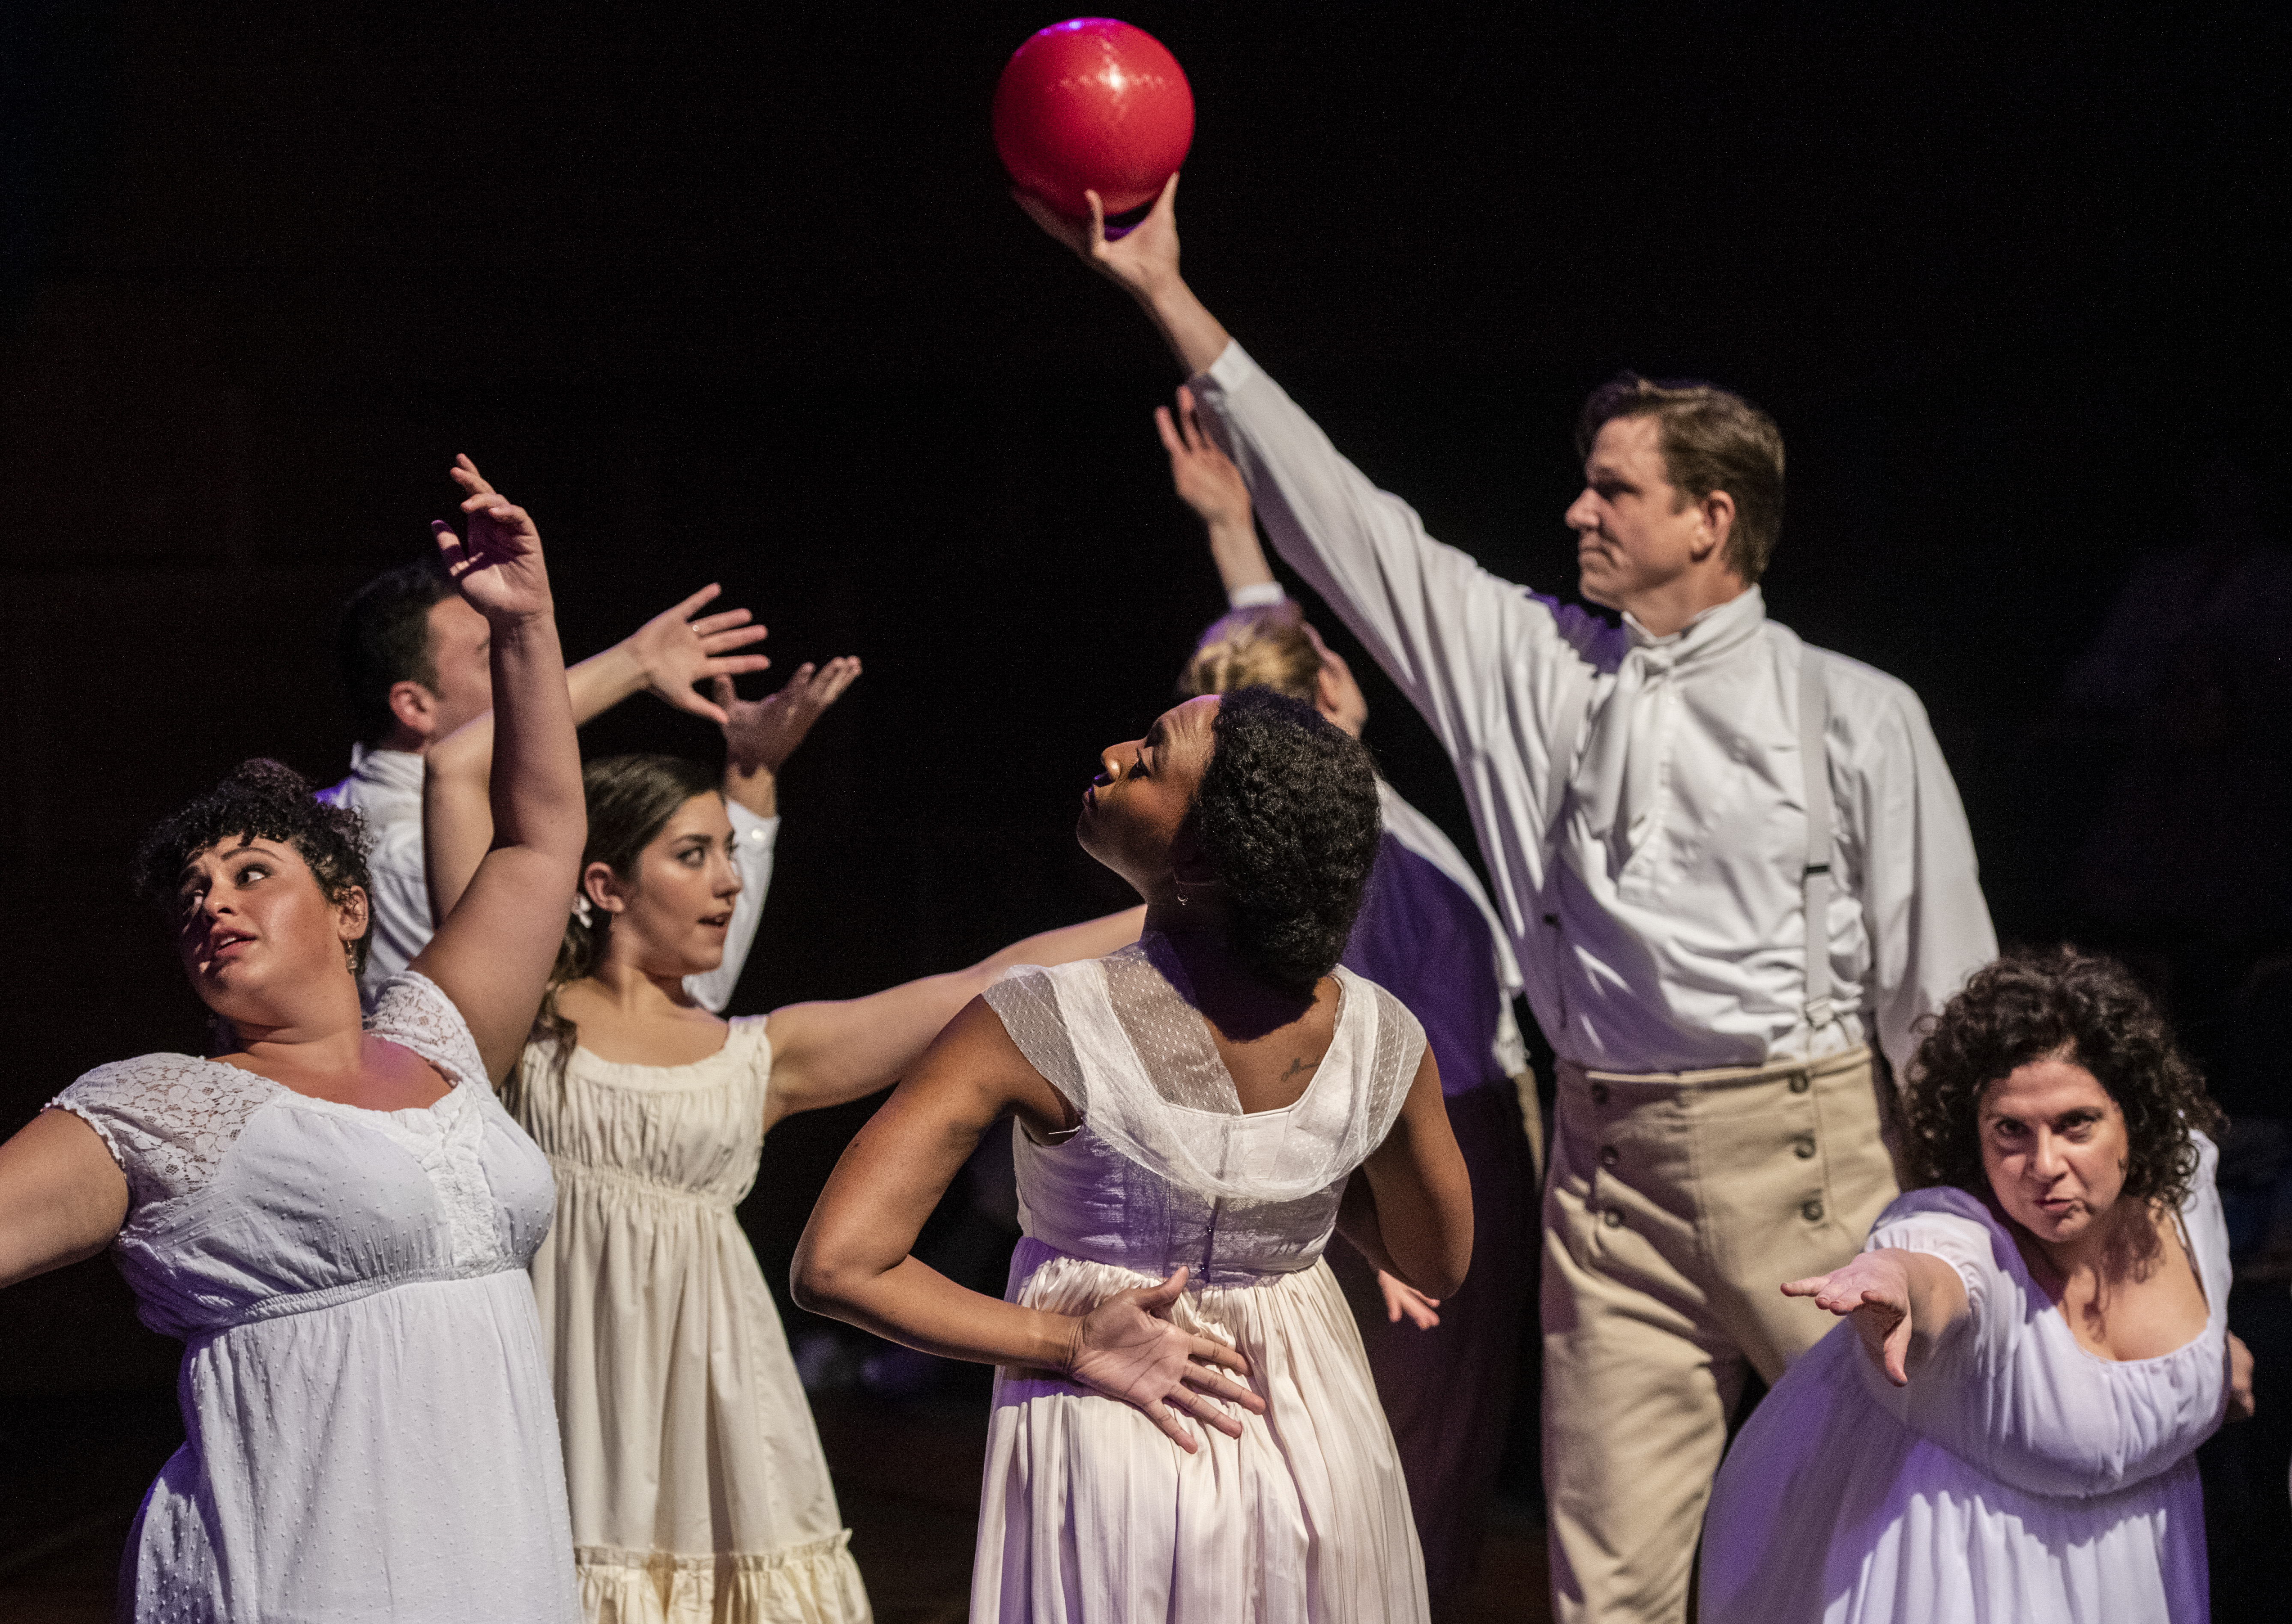 The Bennets frolic in their undies while daughter Mary (Andrew William Smith) proudly holds the red ball high, but when Mary dons a fine dress and veil step into society, she will not do so well.